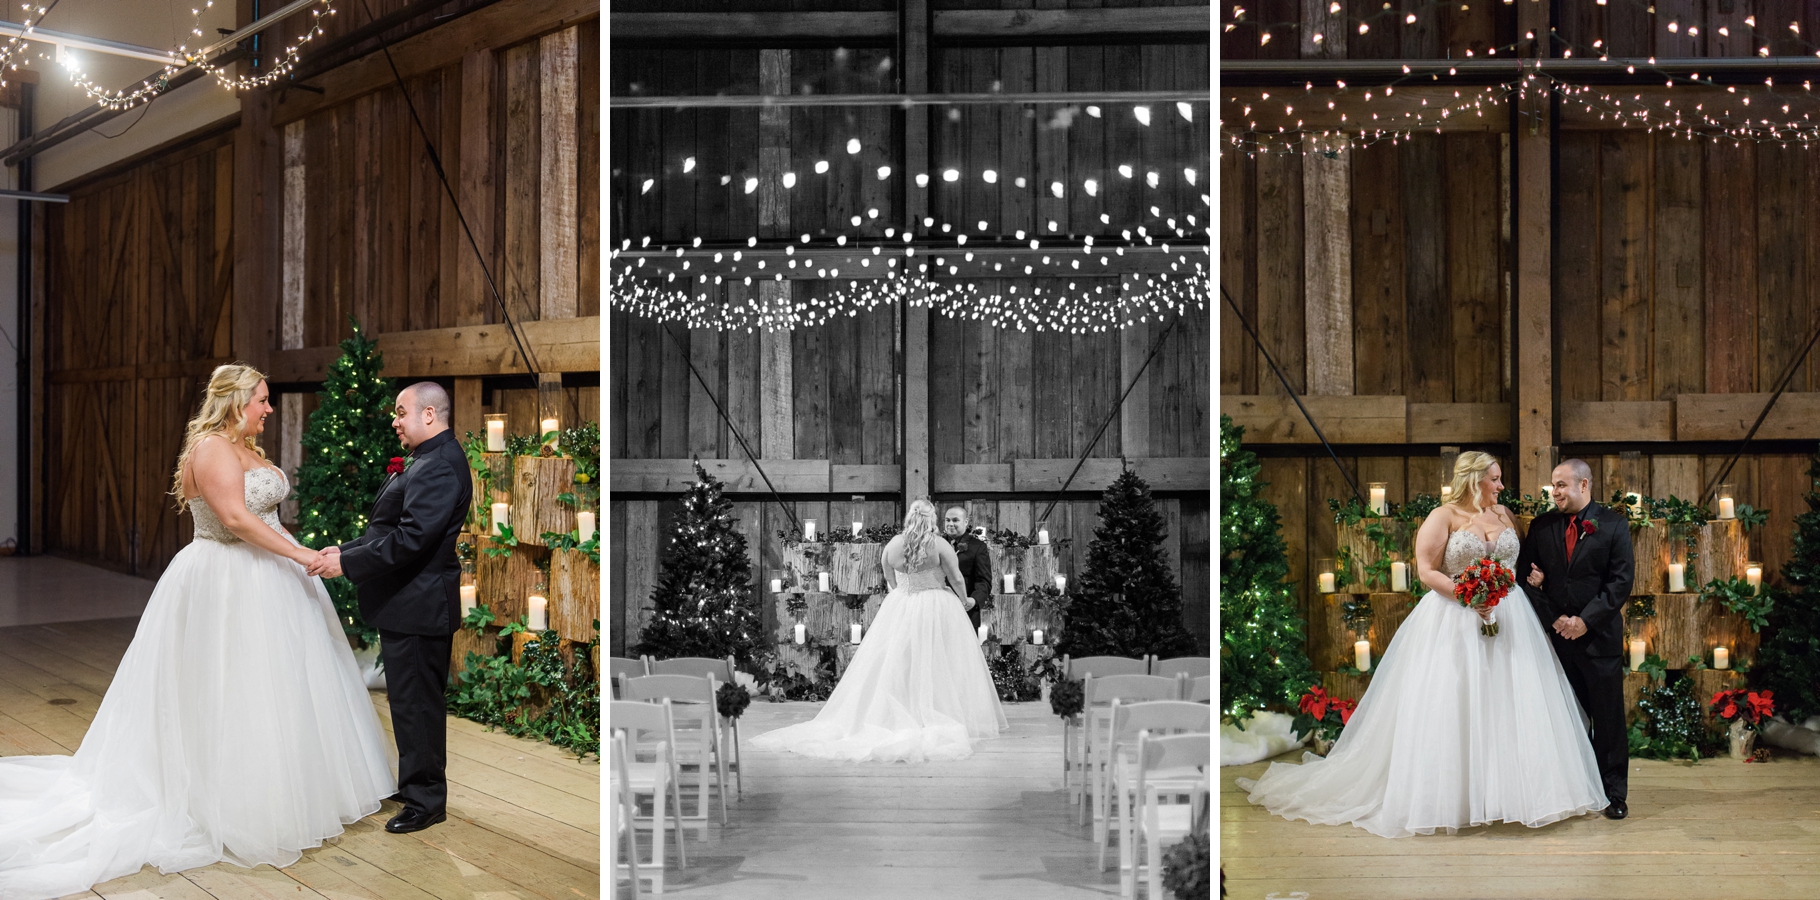 7-First-Look-Bride-Groom-Pickering-Barn-Issaquah-Winter-Wedding-Photographer-Seattle-Photography-by-Betty-Elaine